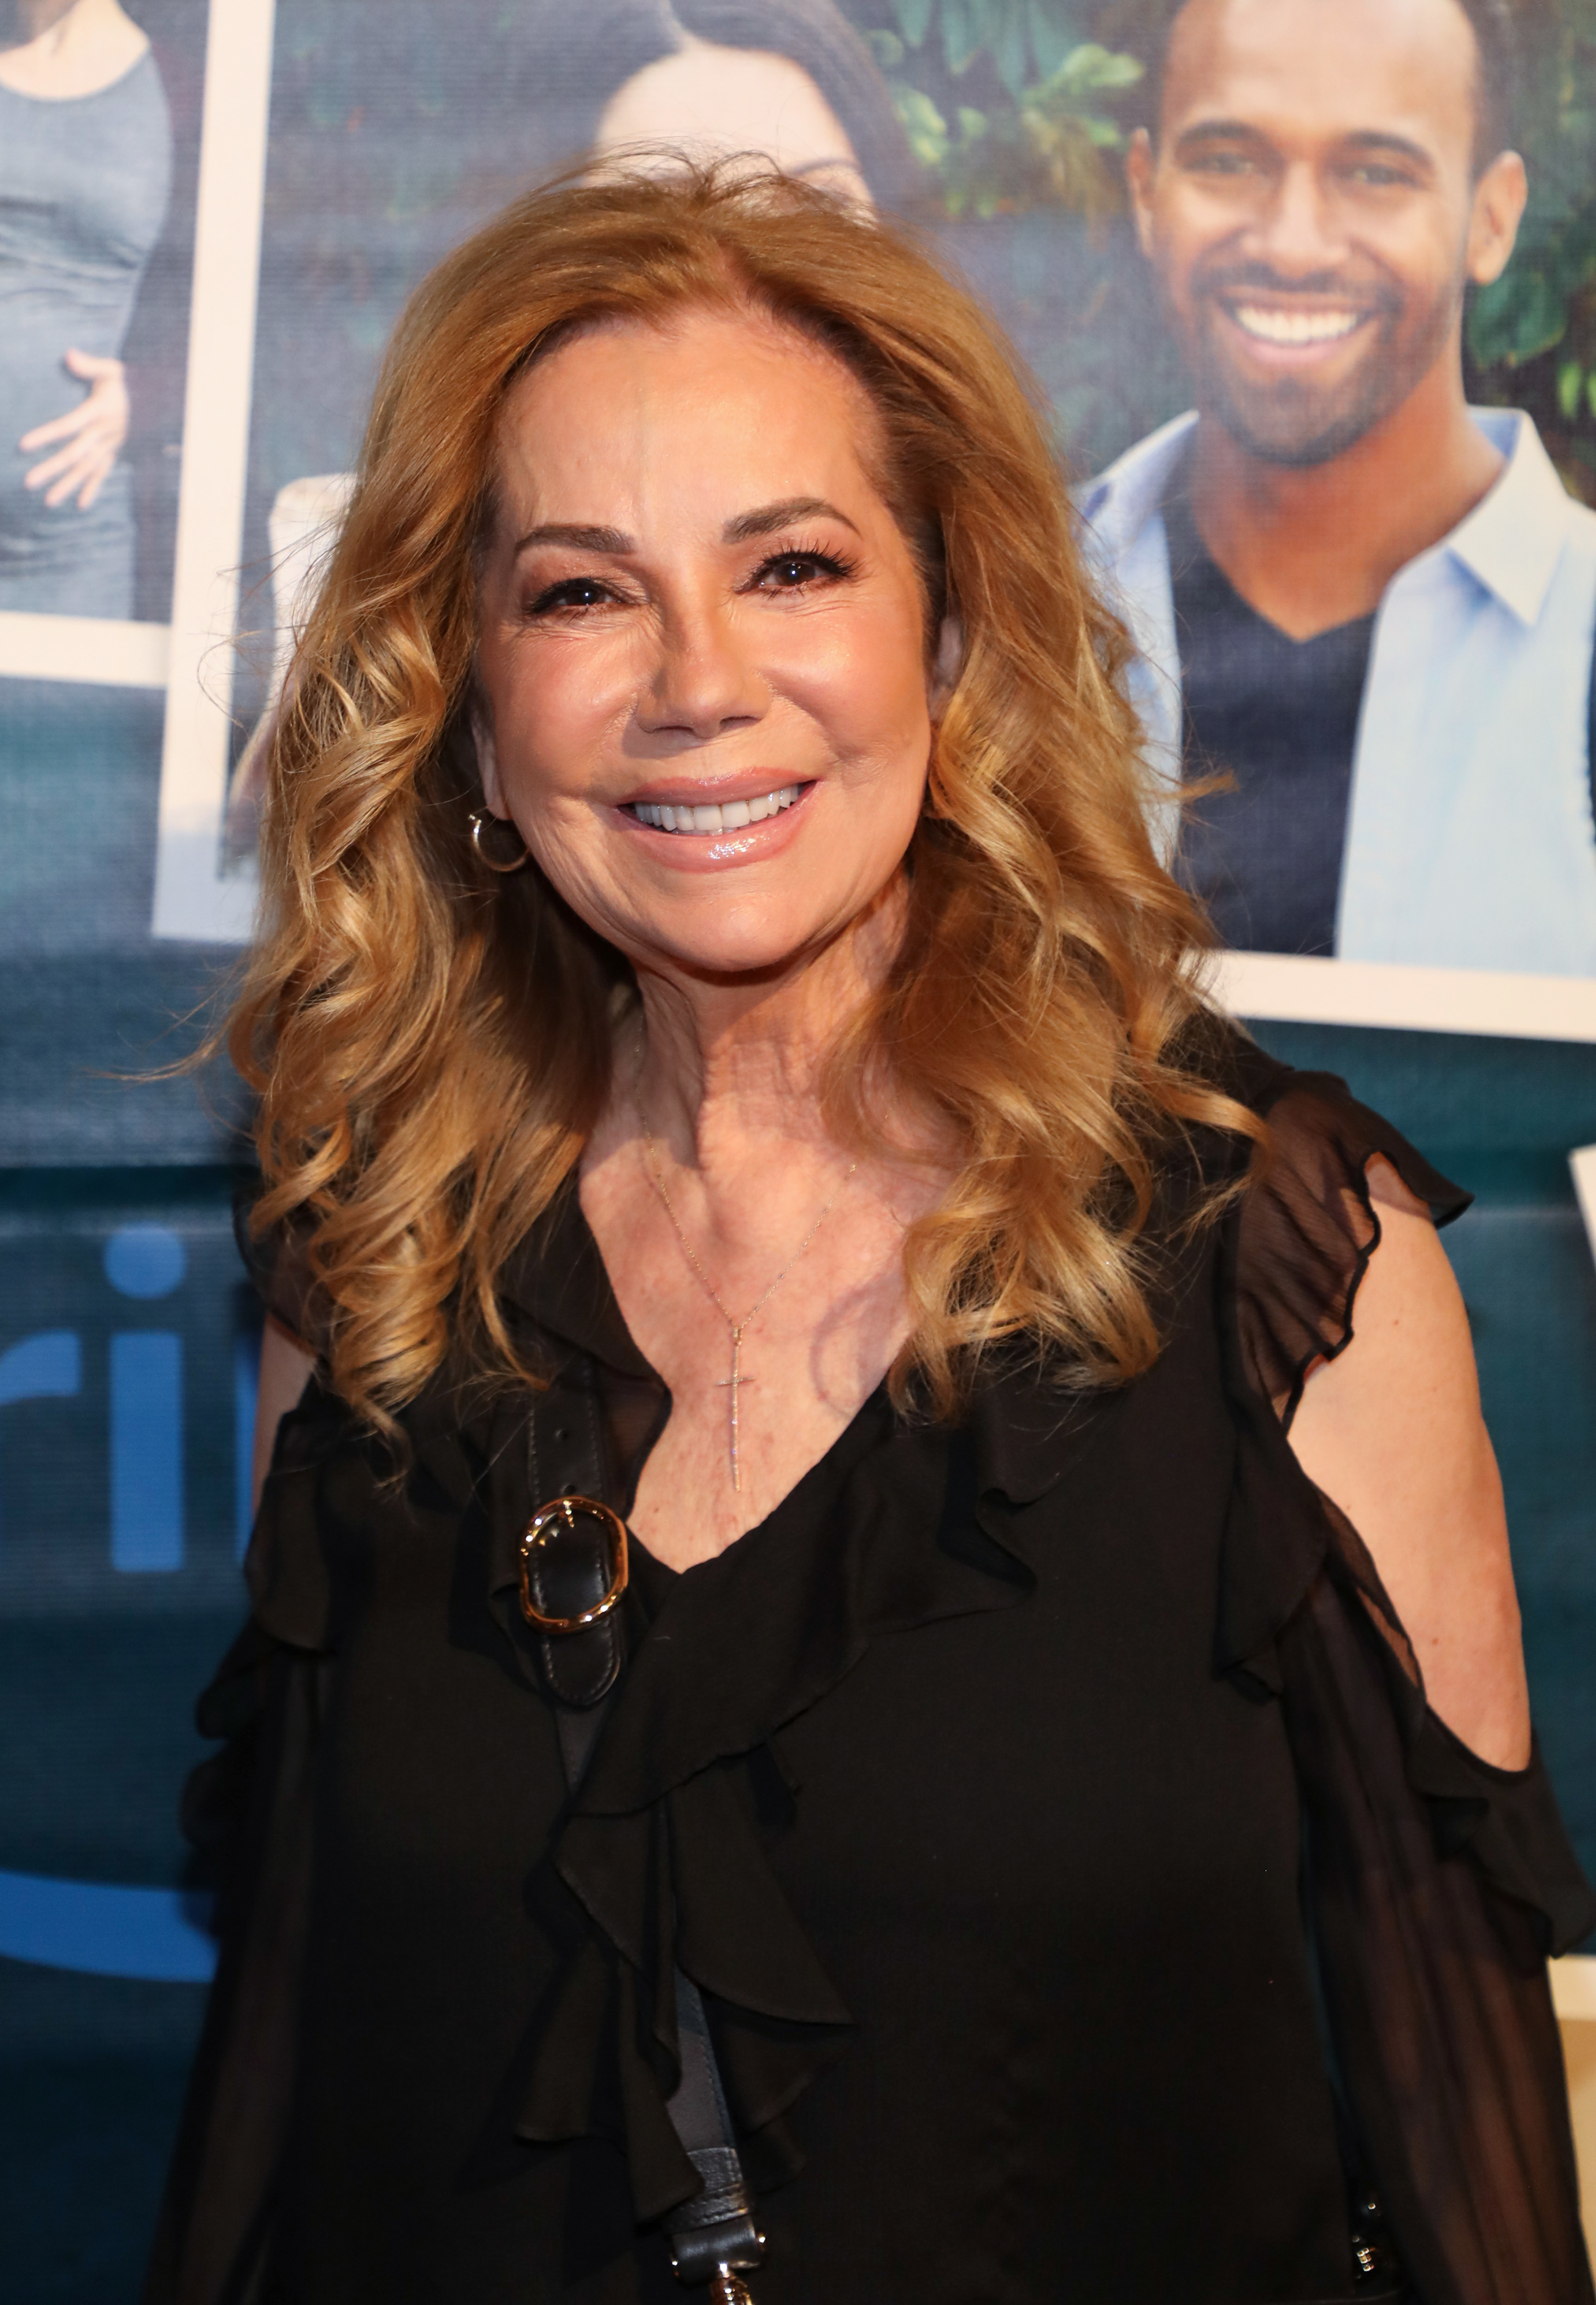 Woman in a ruffled black dress smiling at an event, with movie posters in the background